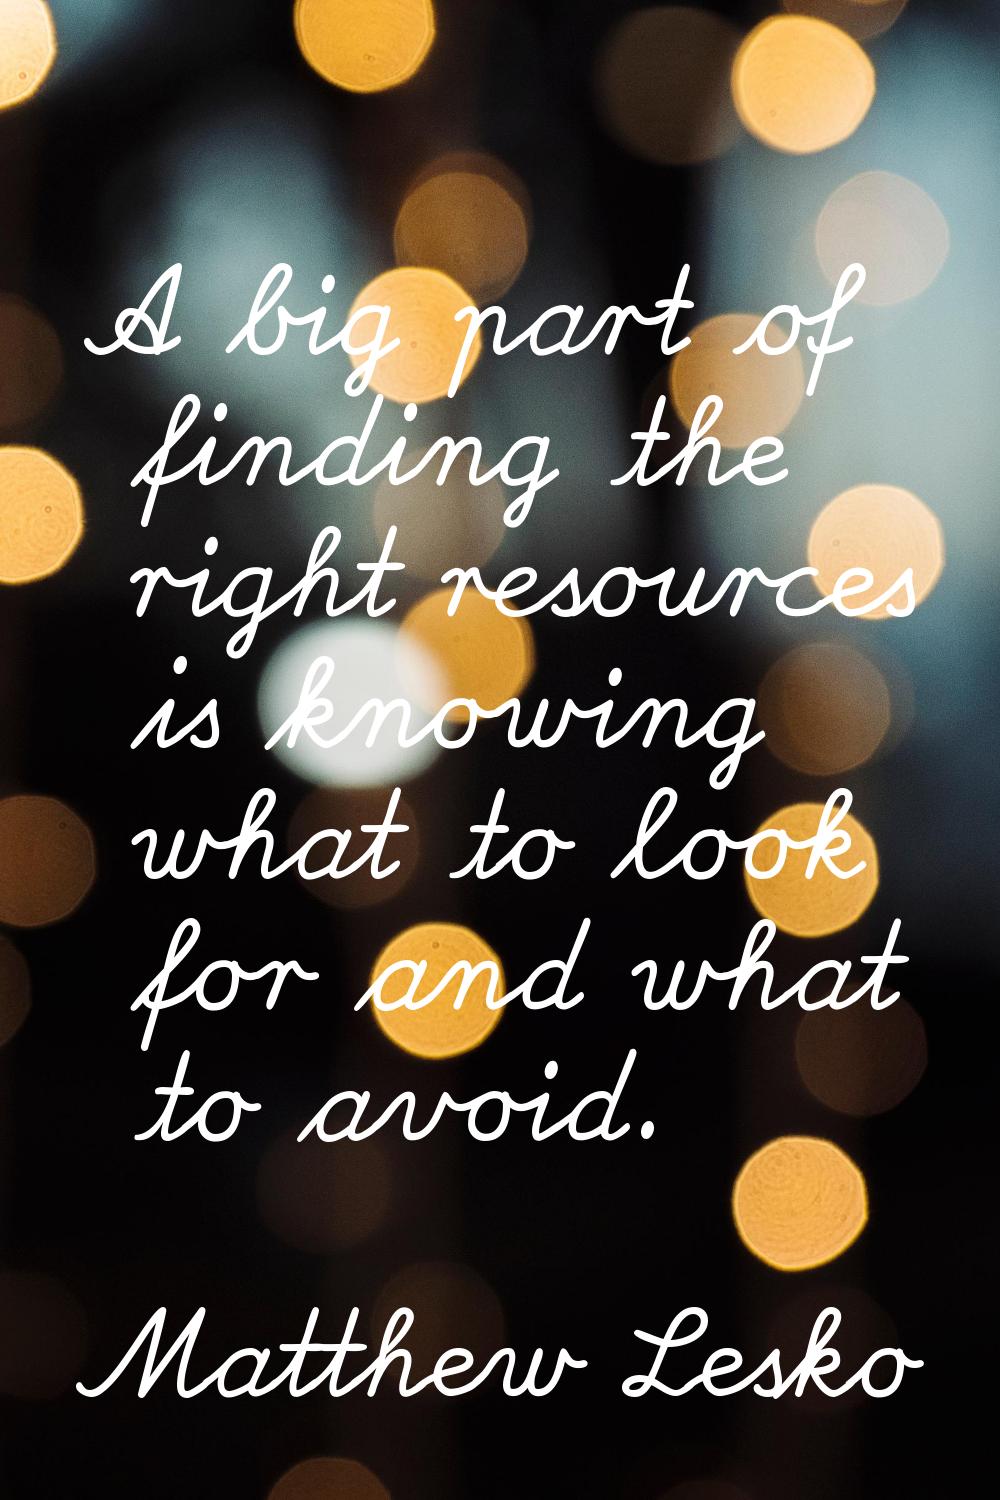 A big part of finding the right resources is knowing what to look for and what to avoid.